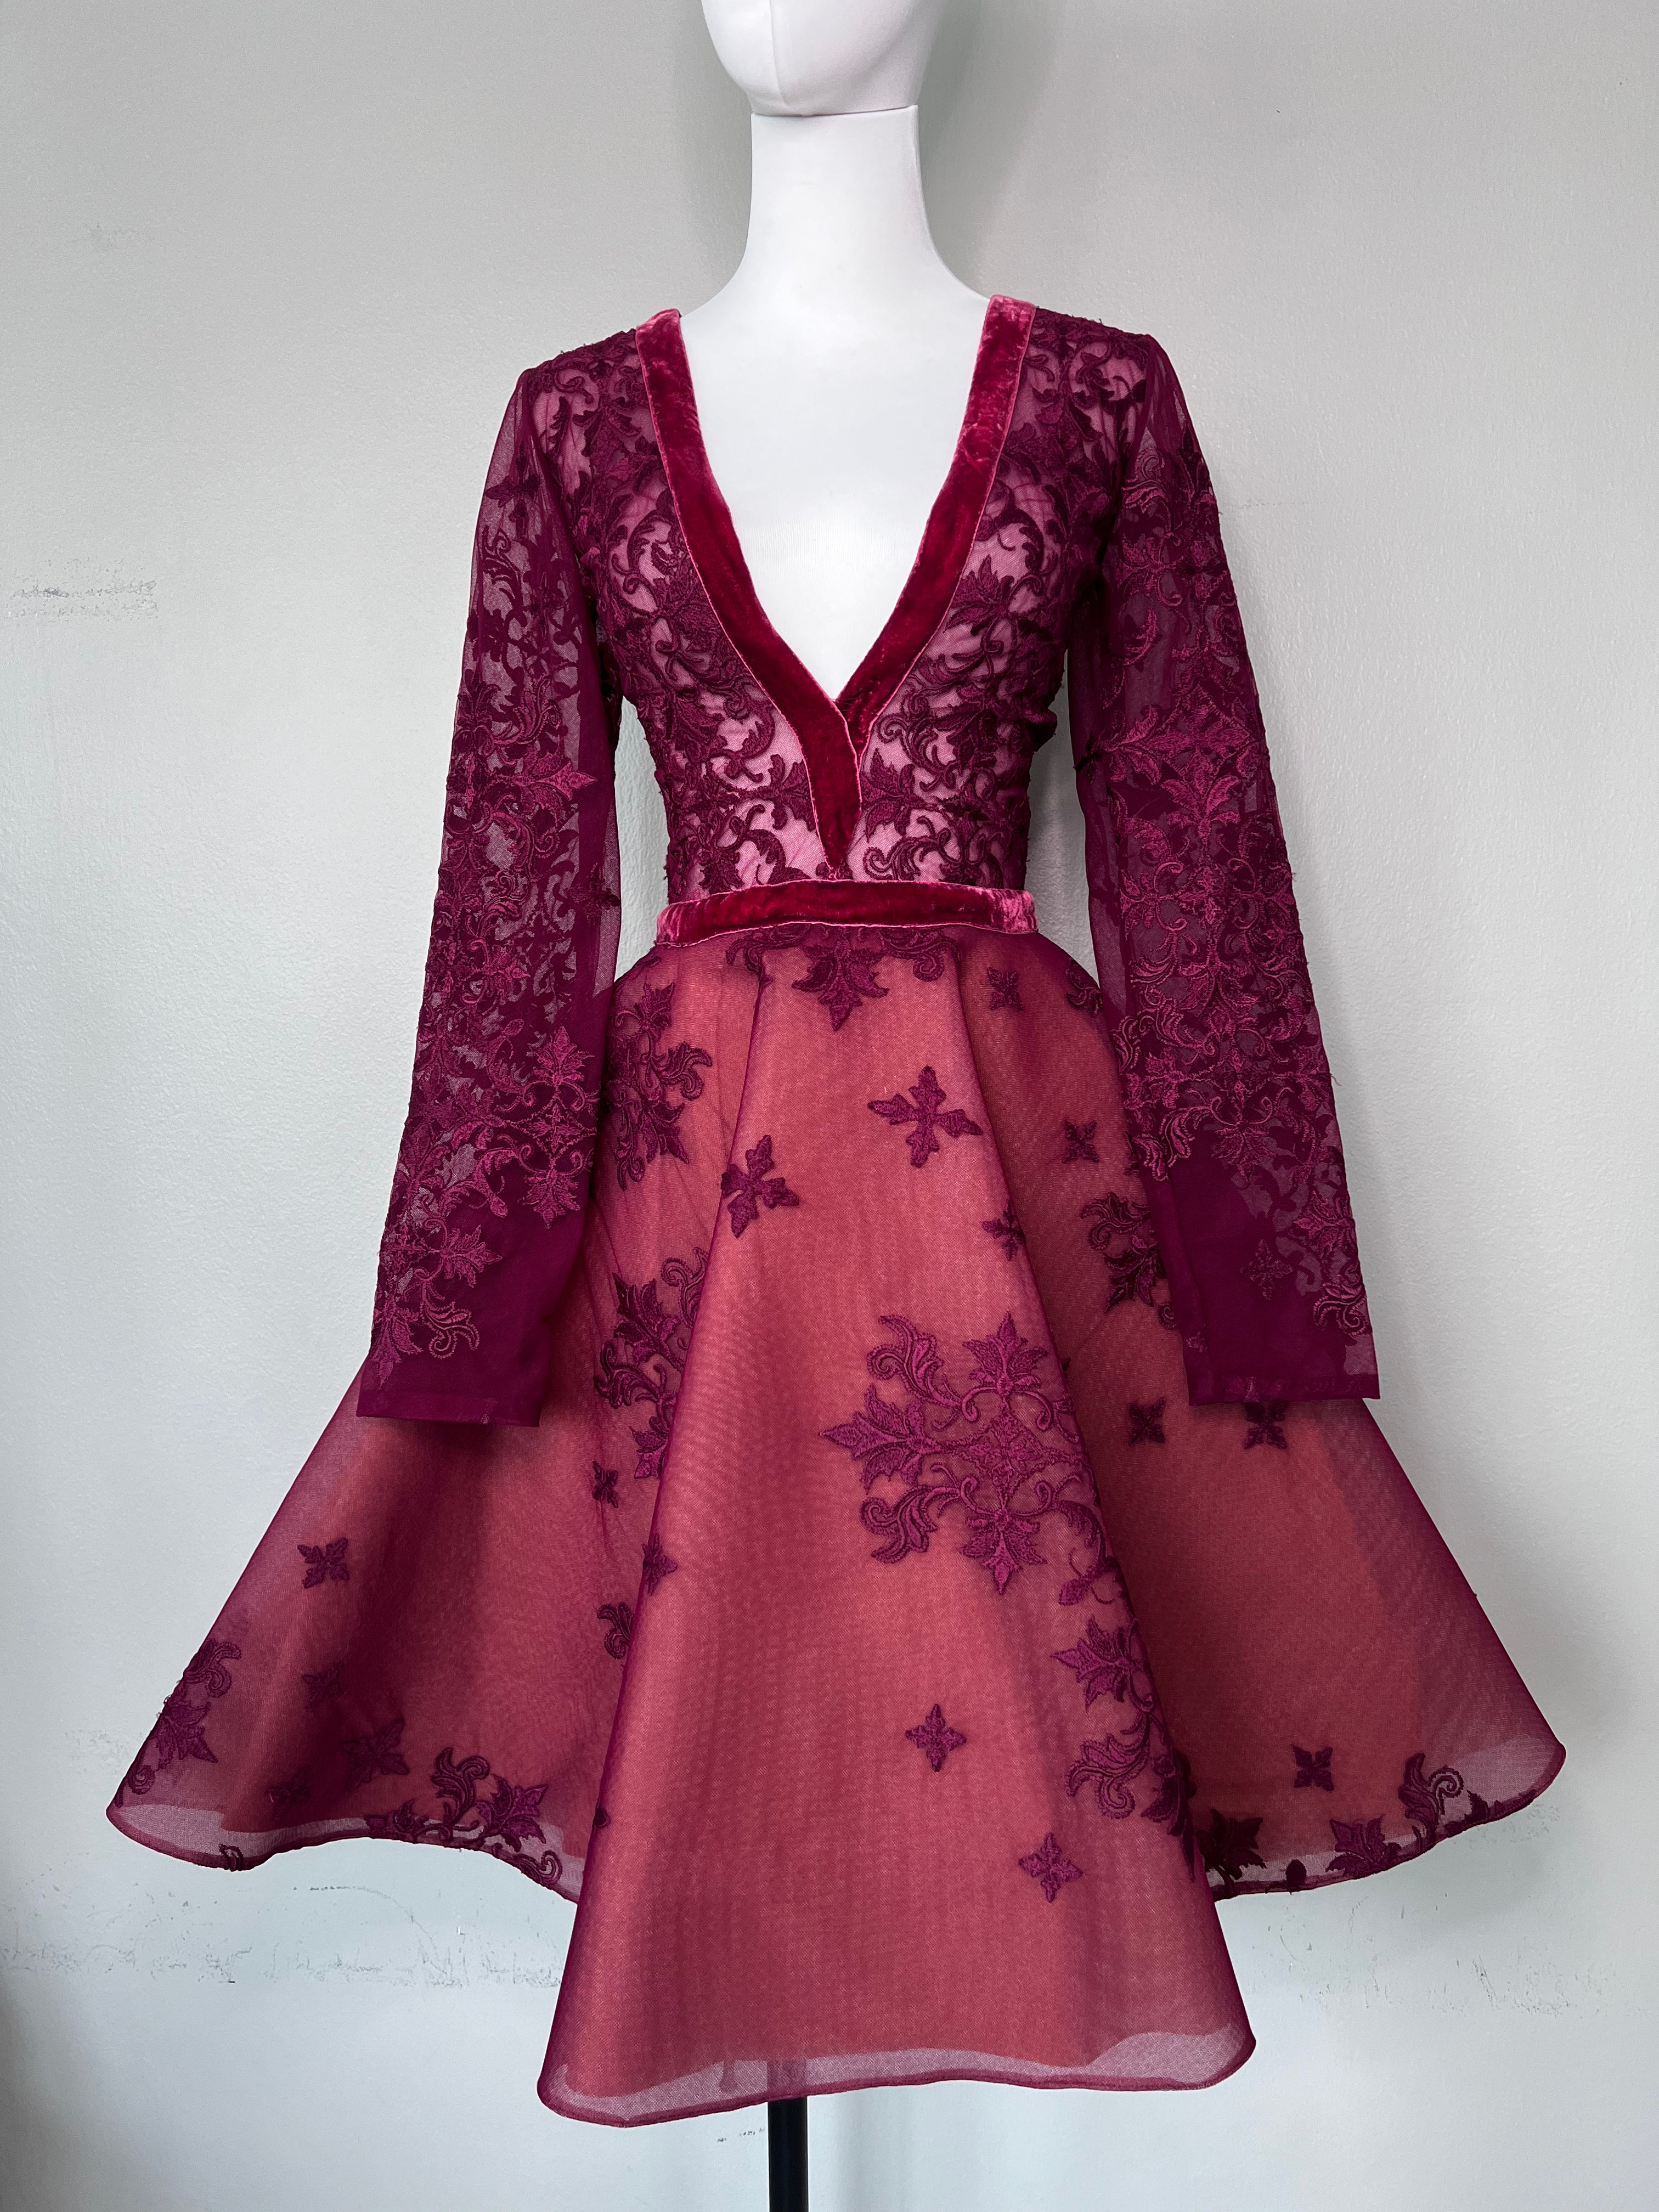 Designer couture deep V maroon cocktail dress with lace top and beadwork all around.